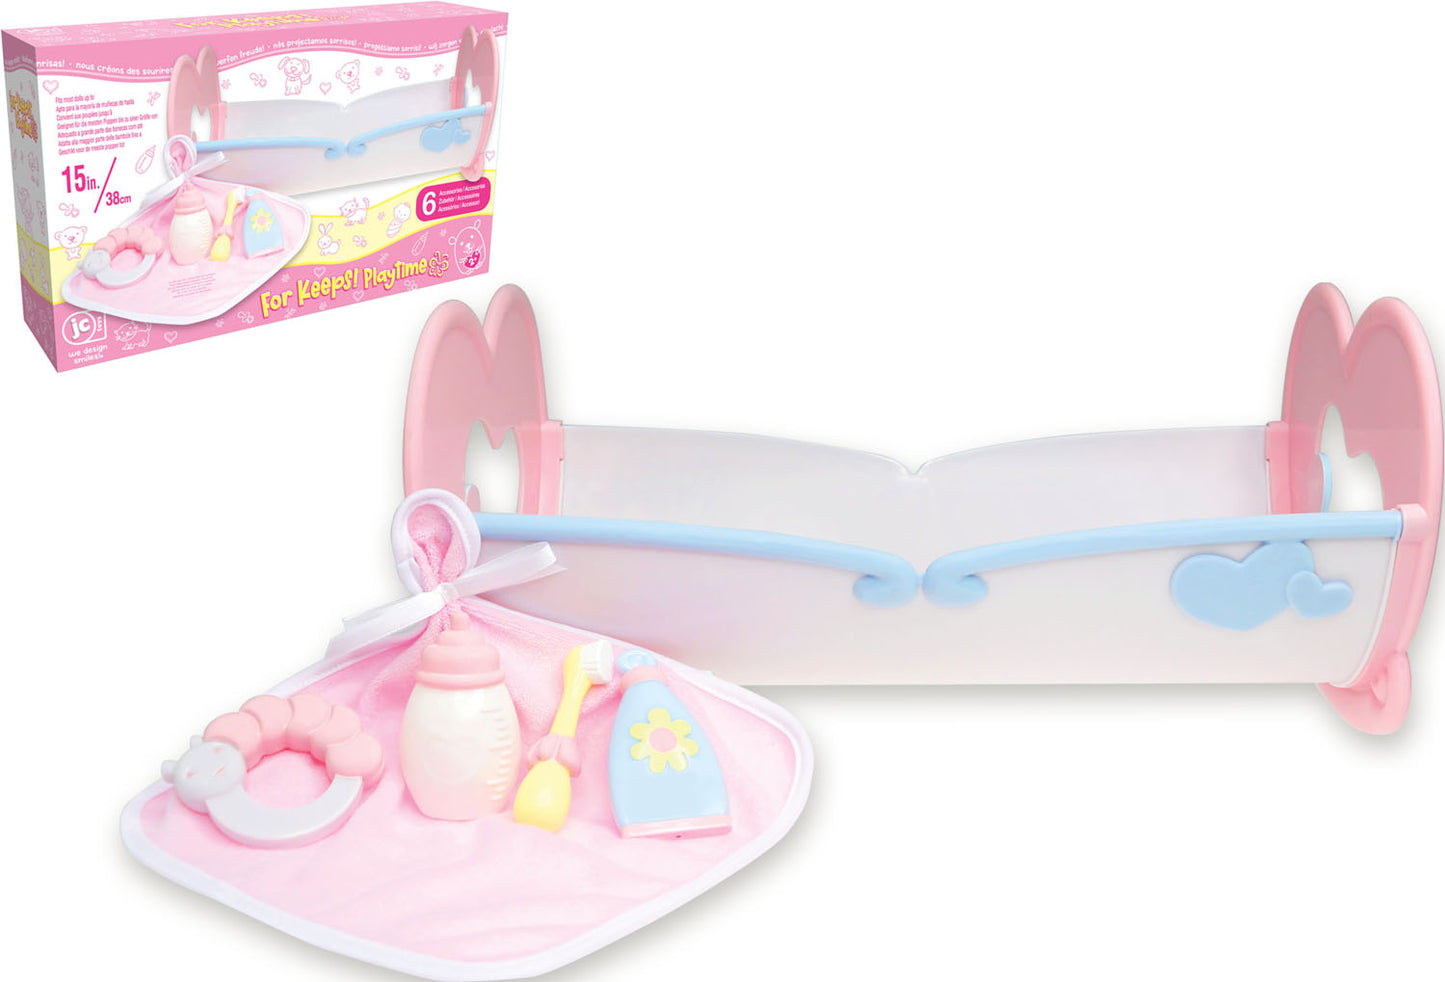 JC Toys, Deluxe Rocking Doll Crib and Accessories for Dolls up to 16 inches